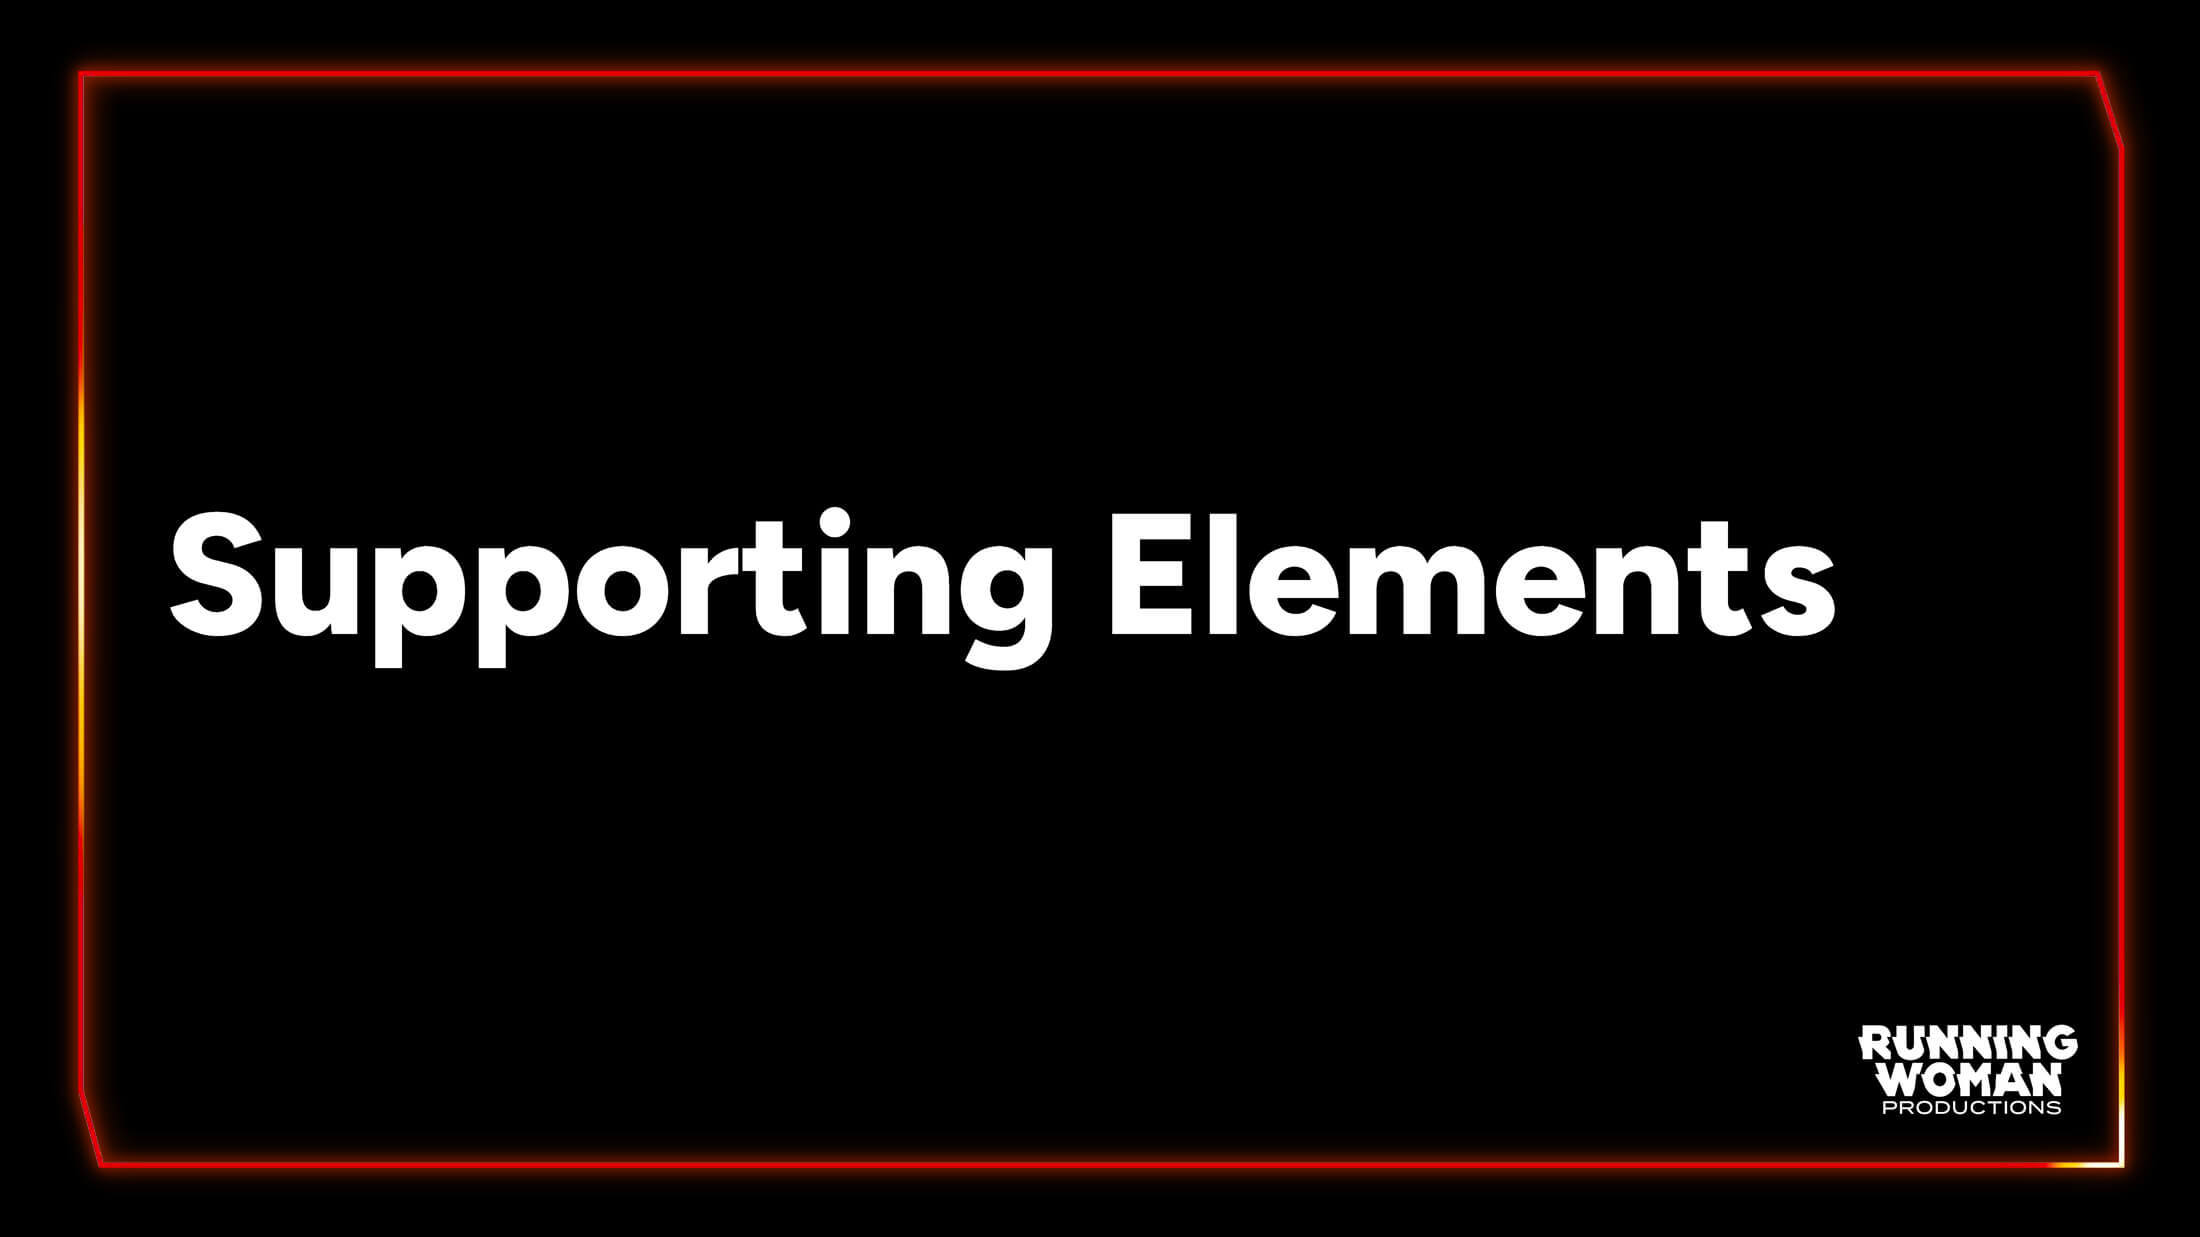 Running Woman Productions section slide that says Supporting Elements